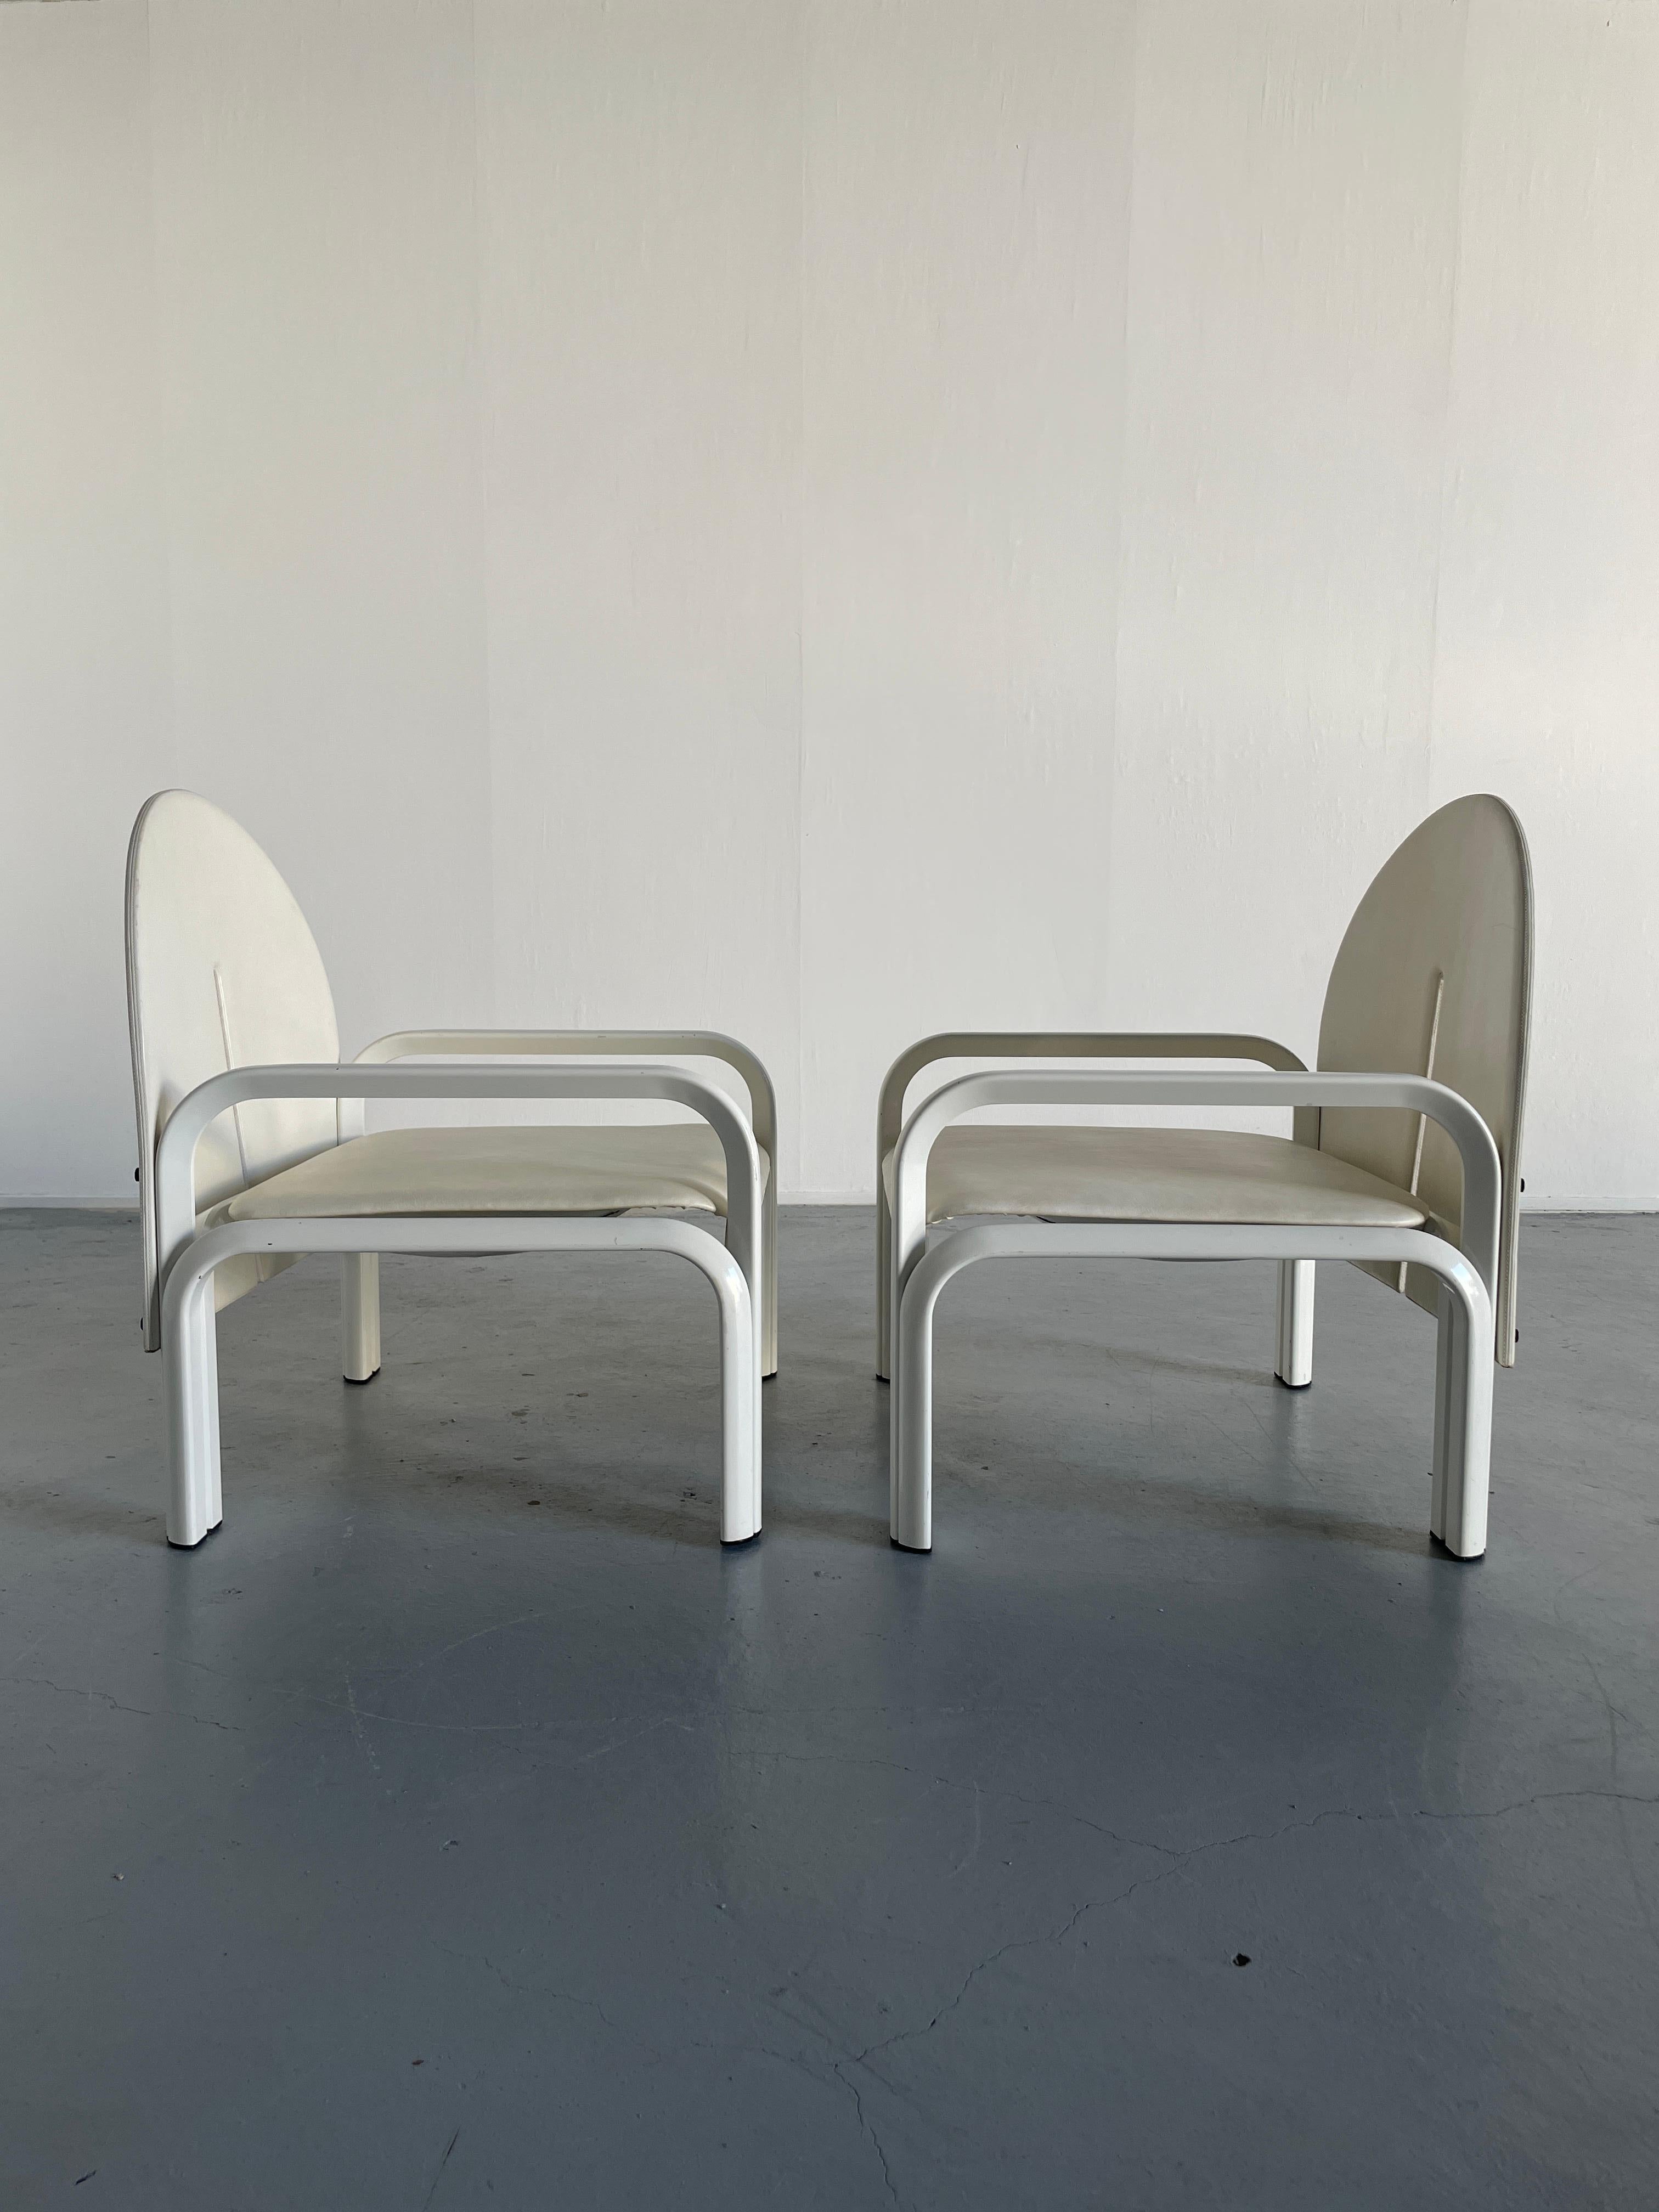 Italian Pair of Gae Aulenti '54L' White Edition Armchairs for Knoll International, 1970s